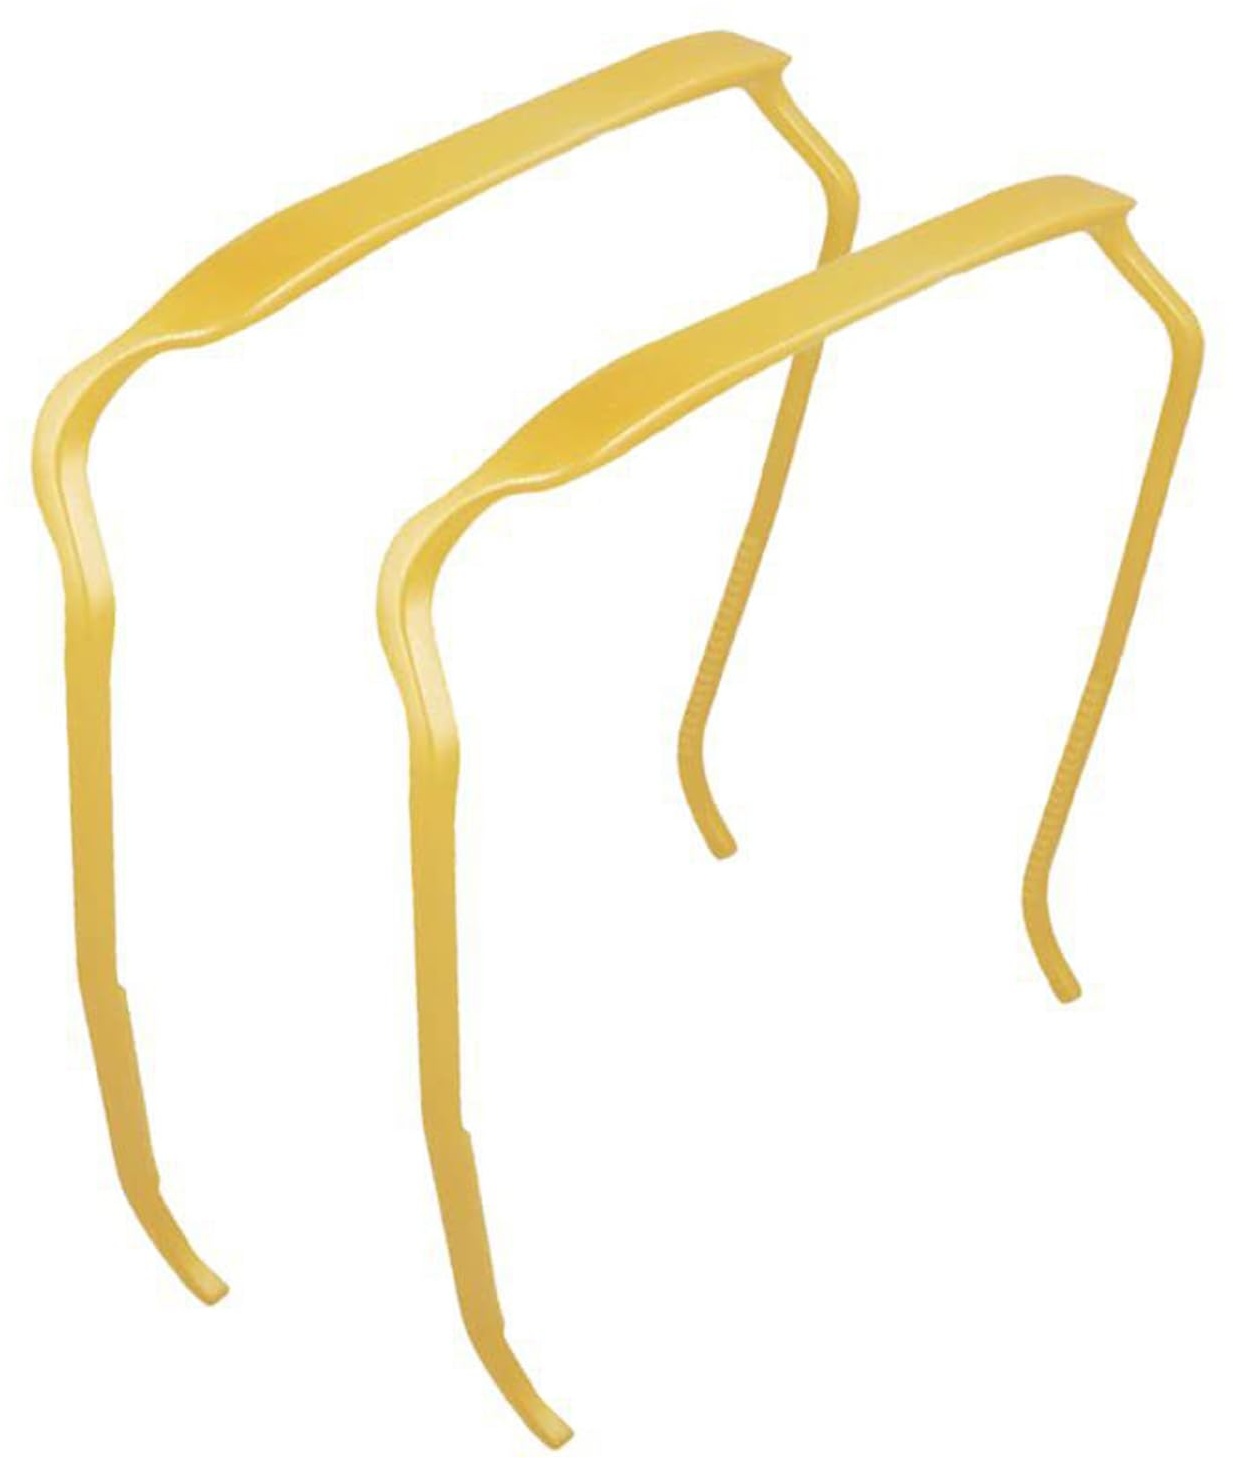 Curly Thick Hair Large Headband,Curly Hair Plastic Hair Hoop Hairband,Sunglasses Headband,Invisible Hair Hoop,Get Volume And Style Hair Without The Headache-Yellow